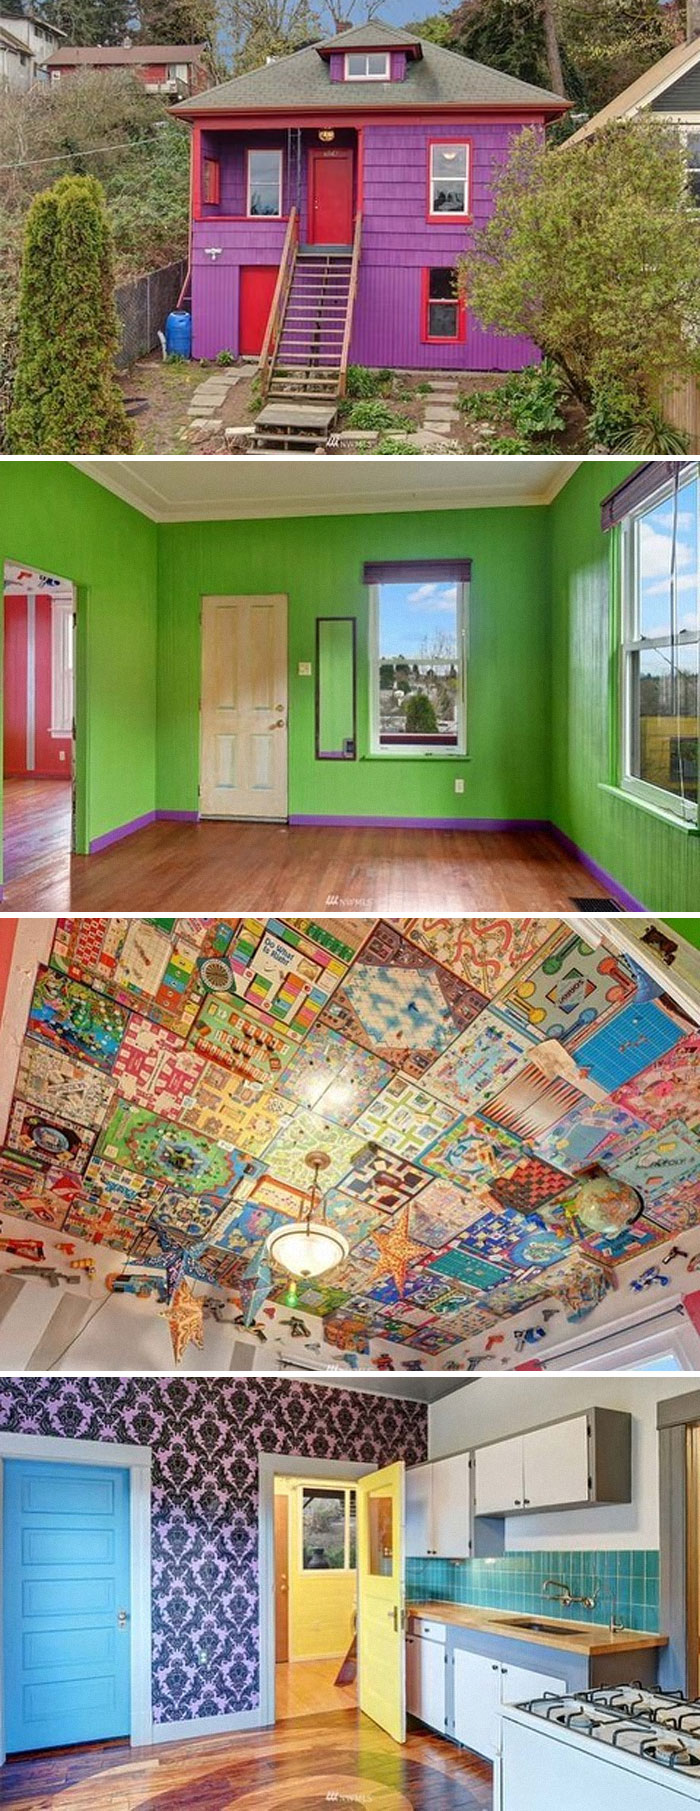 This House Today With A Game Board Ceiling, Monkeys On The Wall And Twisty Wizard Of Oz Floors. Wow